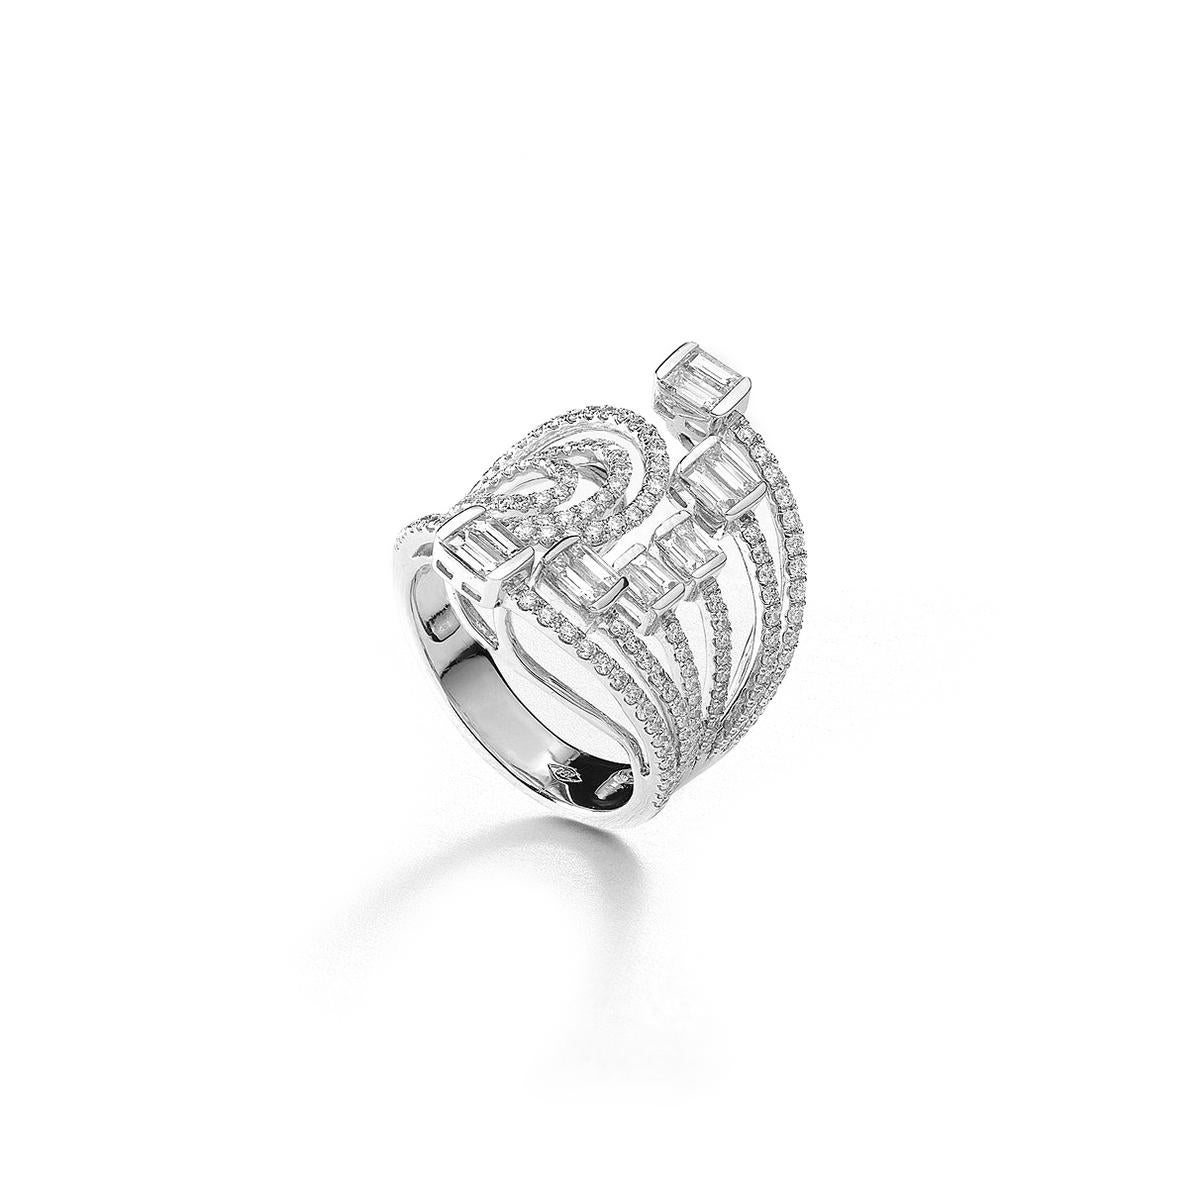 Ring in 18kt white gold set with 12 baguette cut diamonds 0.76 cts and 159 diamonds 1.08 cts Size 54    